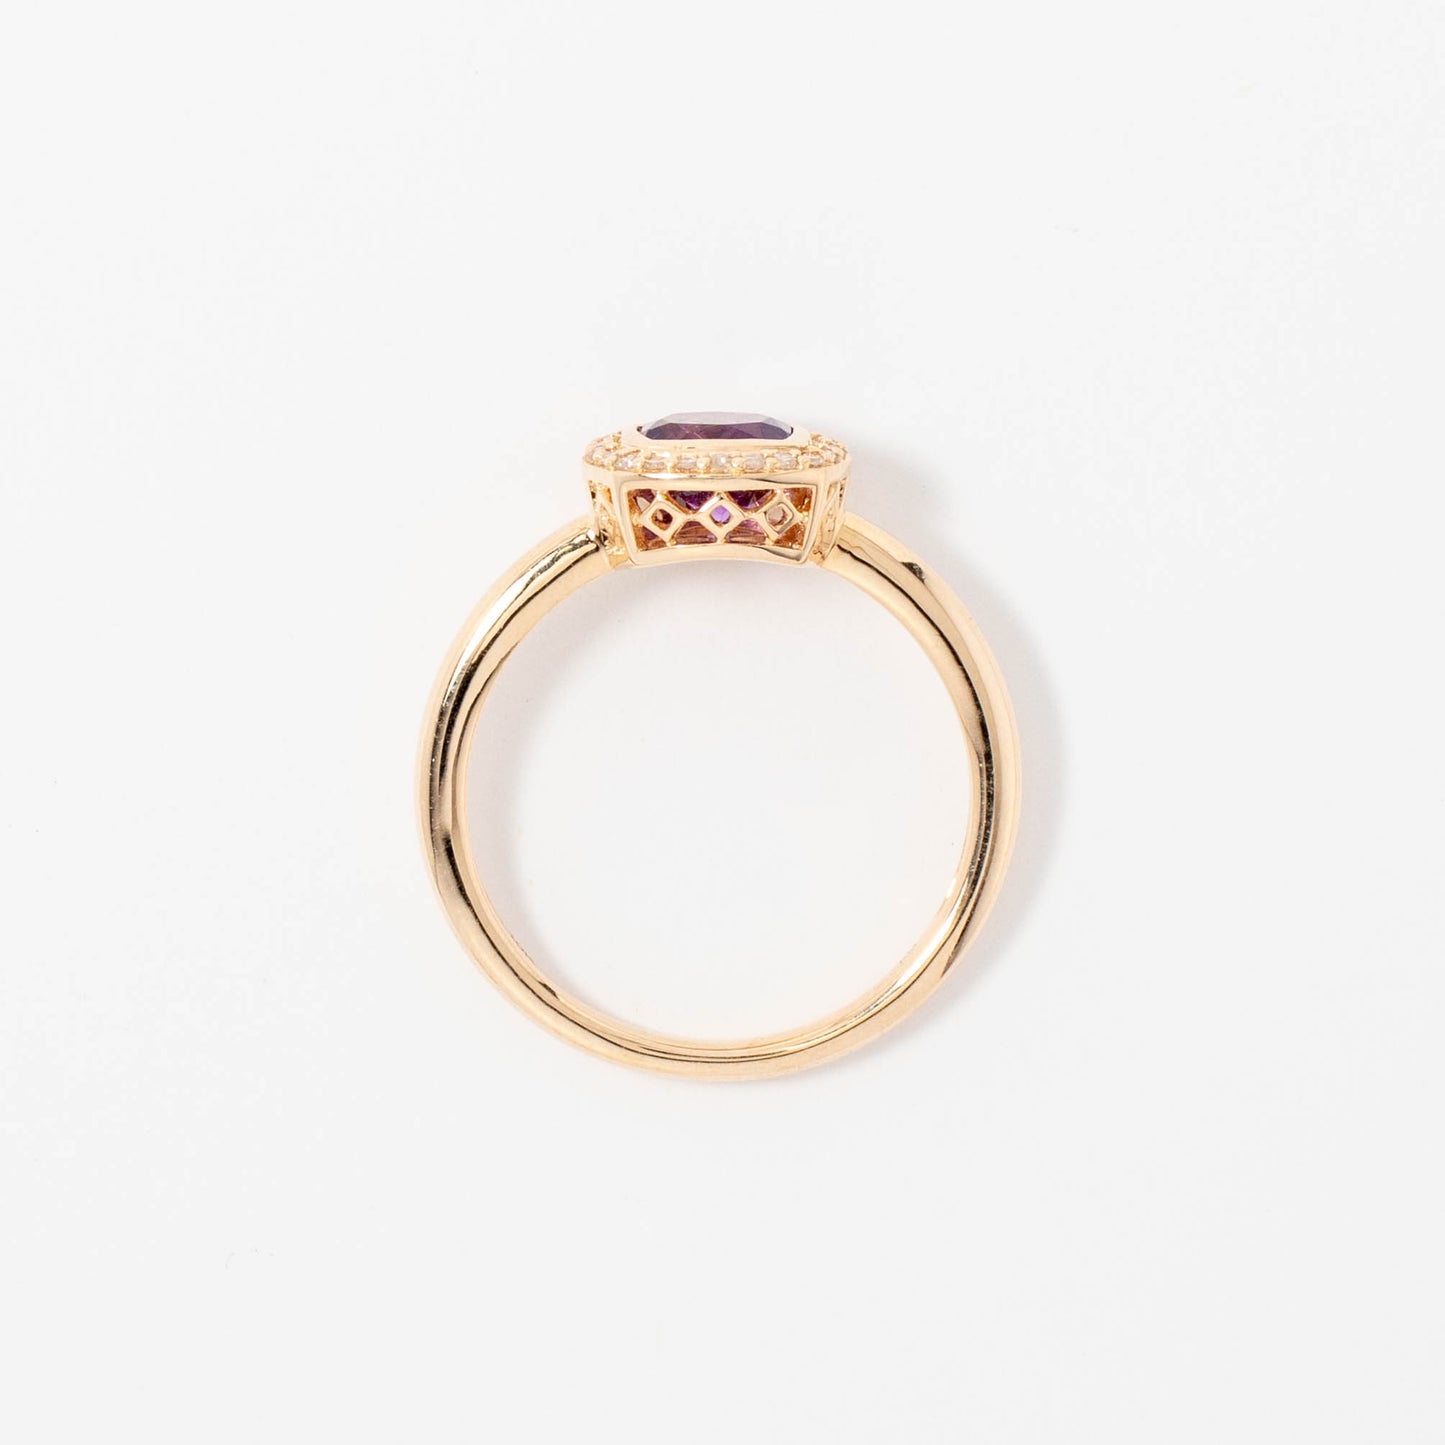 Cushion Cut Amethyst Ring with Diamond Accents in 10K Yellow Gold